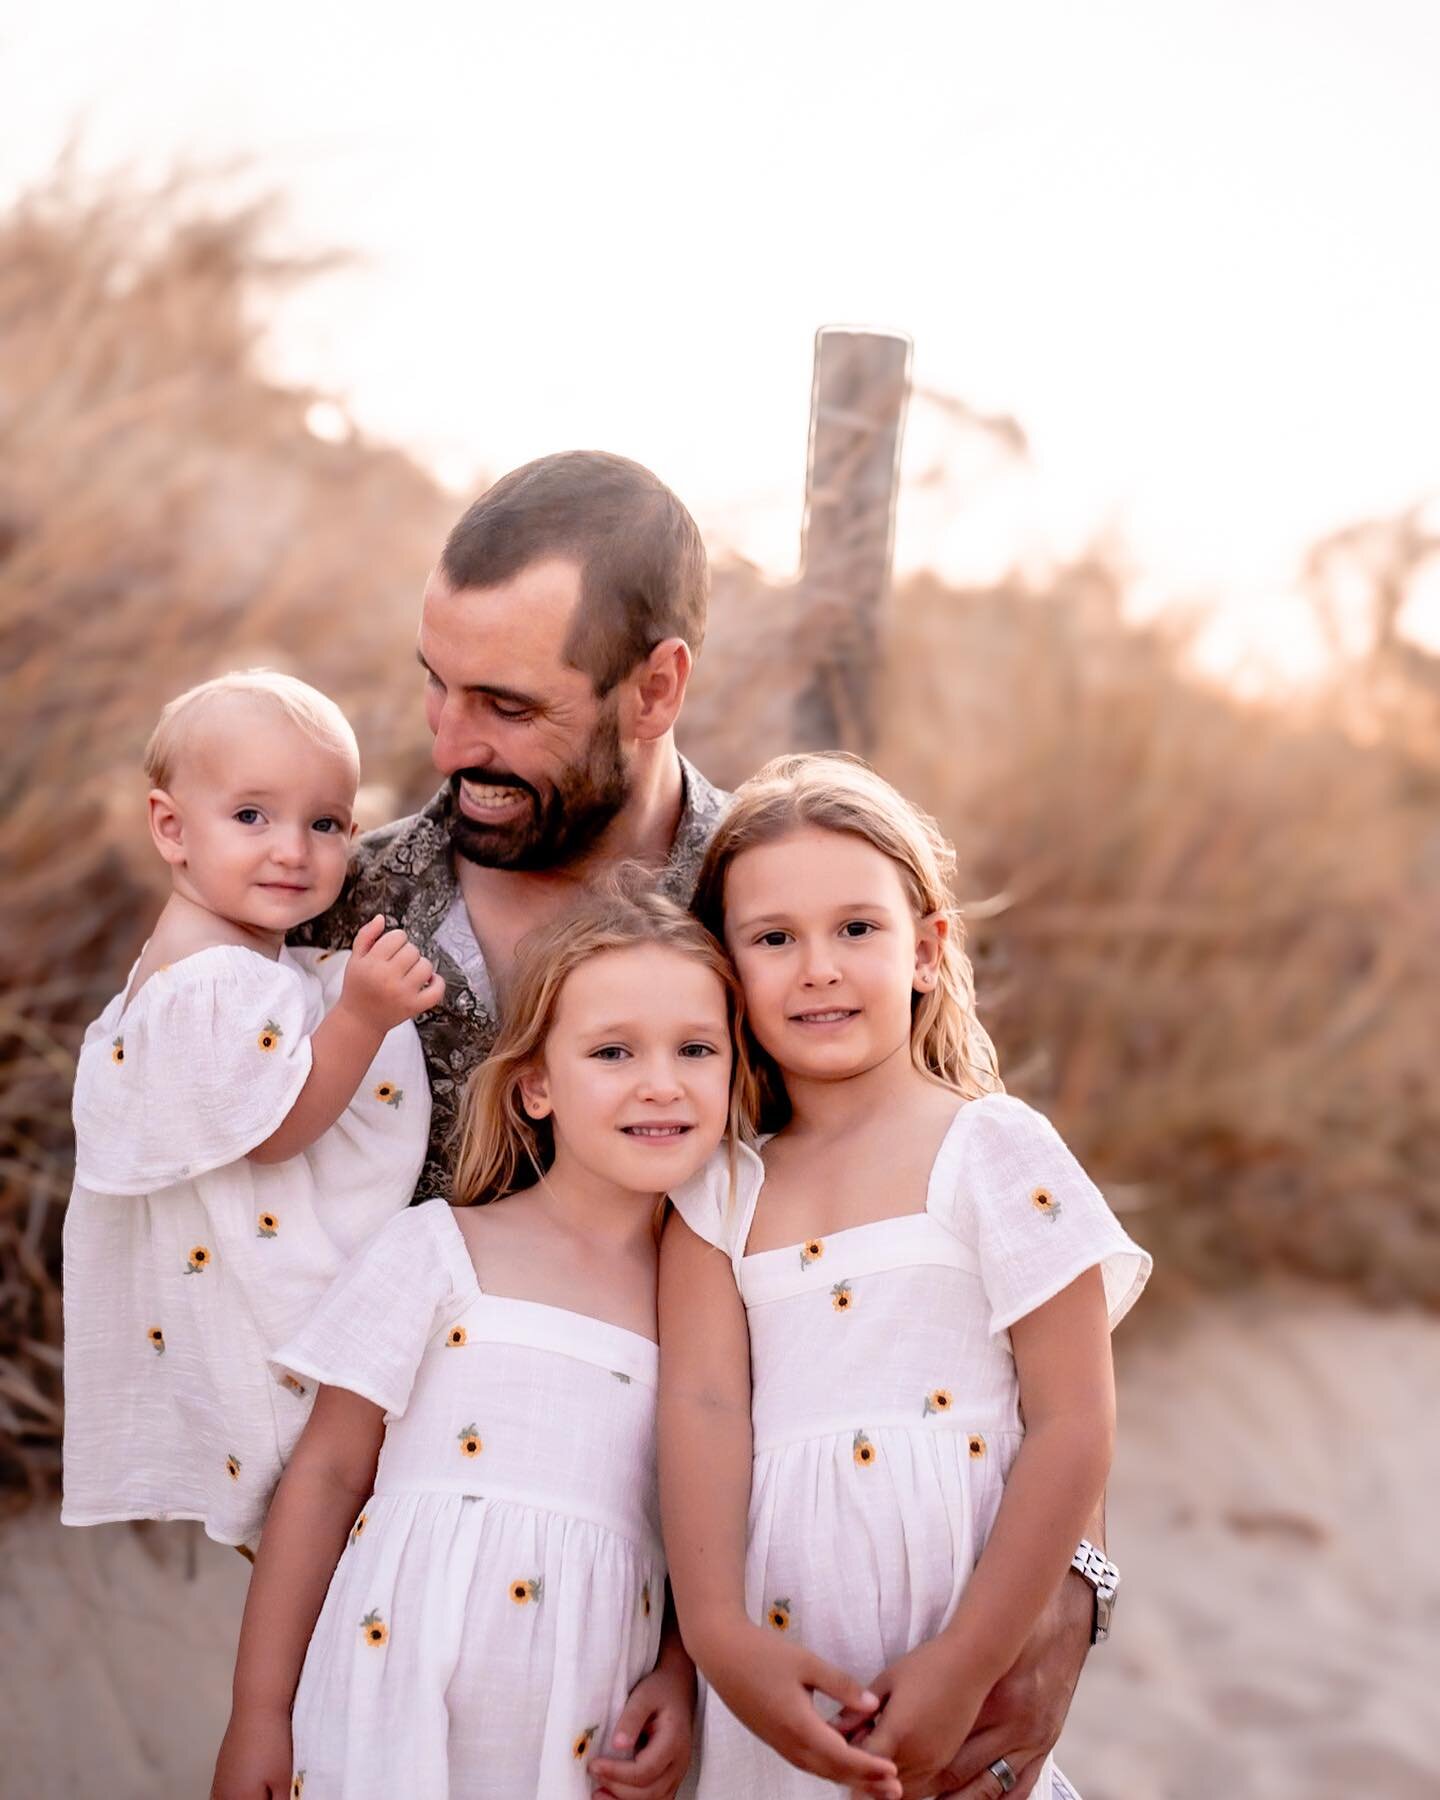 What an amazing evening spent with this gorgeous family! And aren&rsquo;t the sunflower dresses the absolute best 🌻🌻🌻🌻#PerthFamilyPhotographer #FamilyMomentsPerth #PerthFamilyPortraits #CaptureFamilyLove #PerthPhotography #FamilyPhotographyPerth 